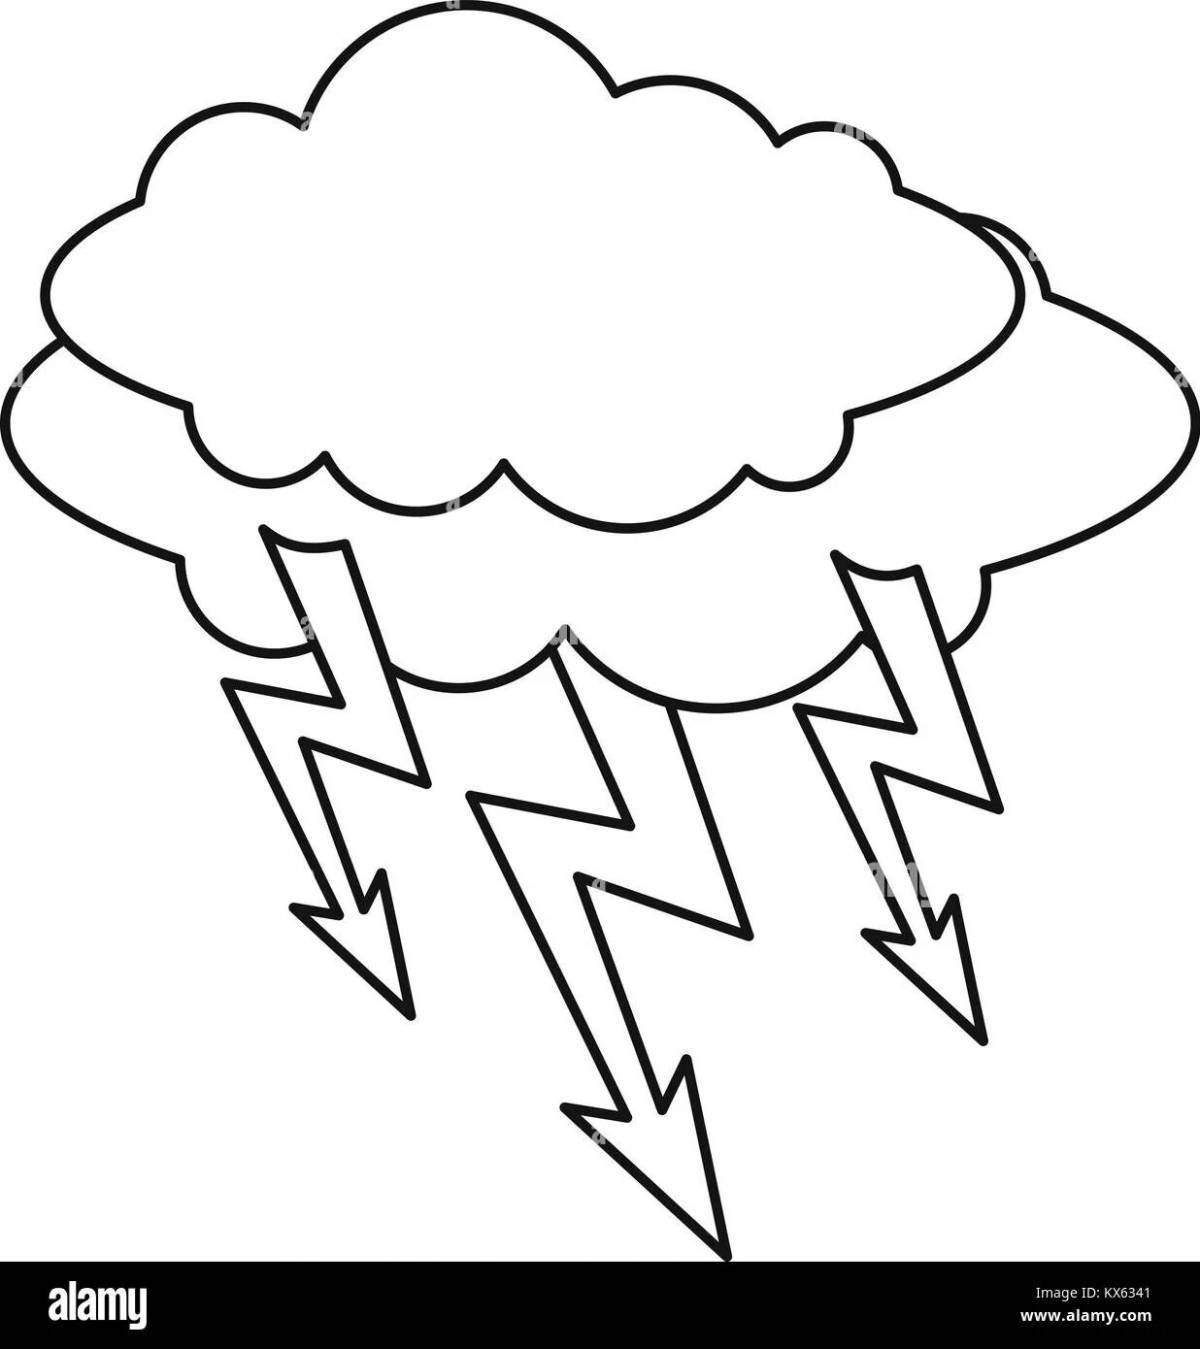 Impressive thunderstorm coloring page for kids